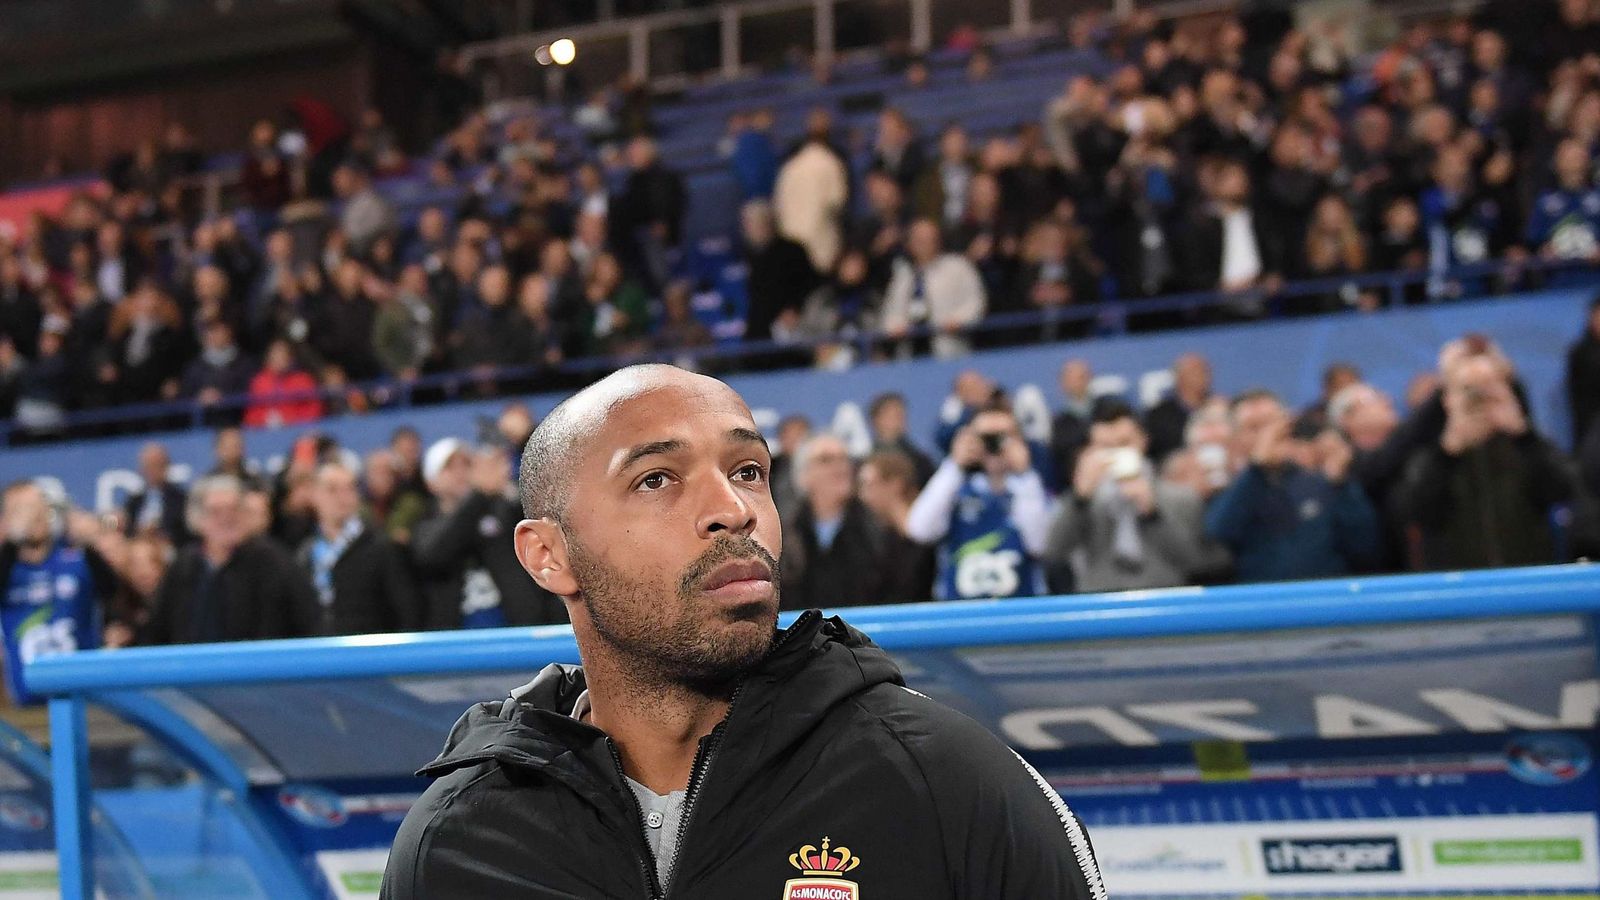 Thierry Henry threatens to leave the studio when asked if he'd